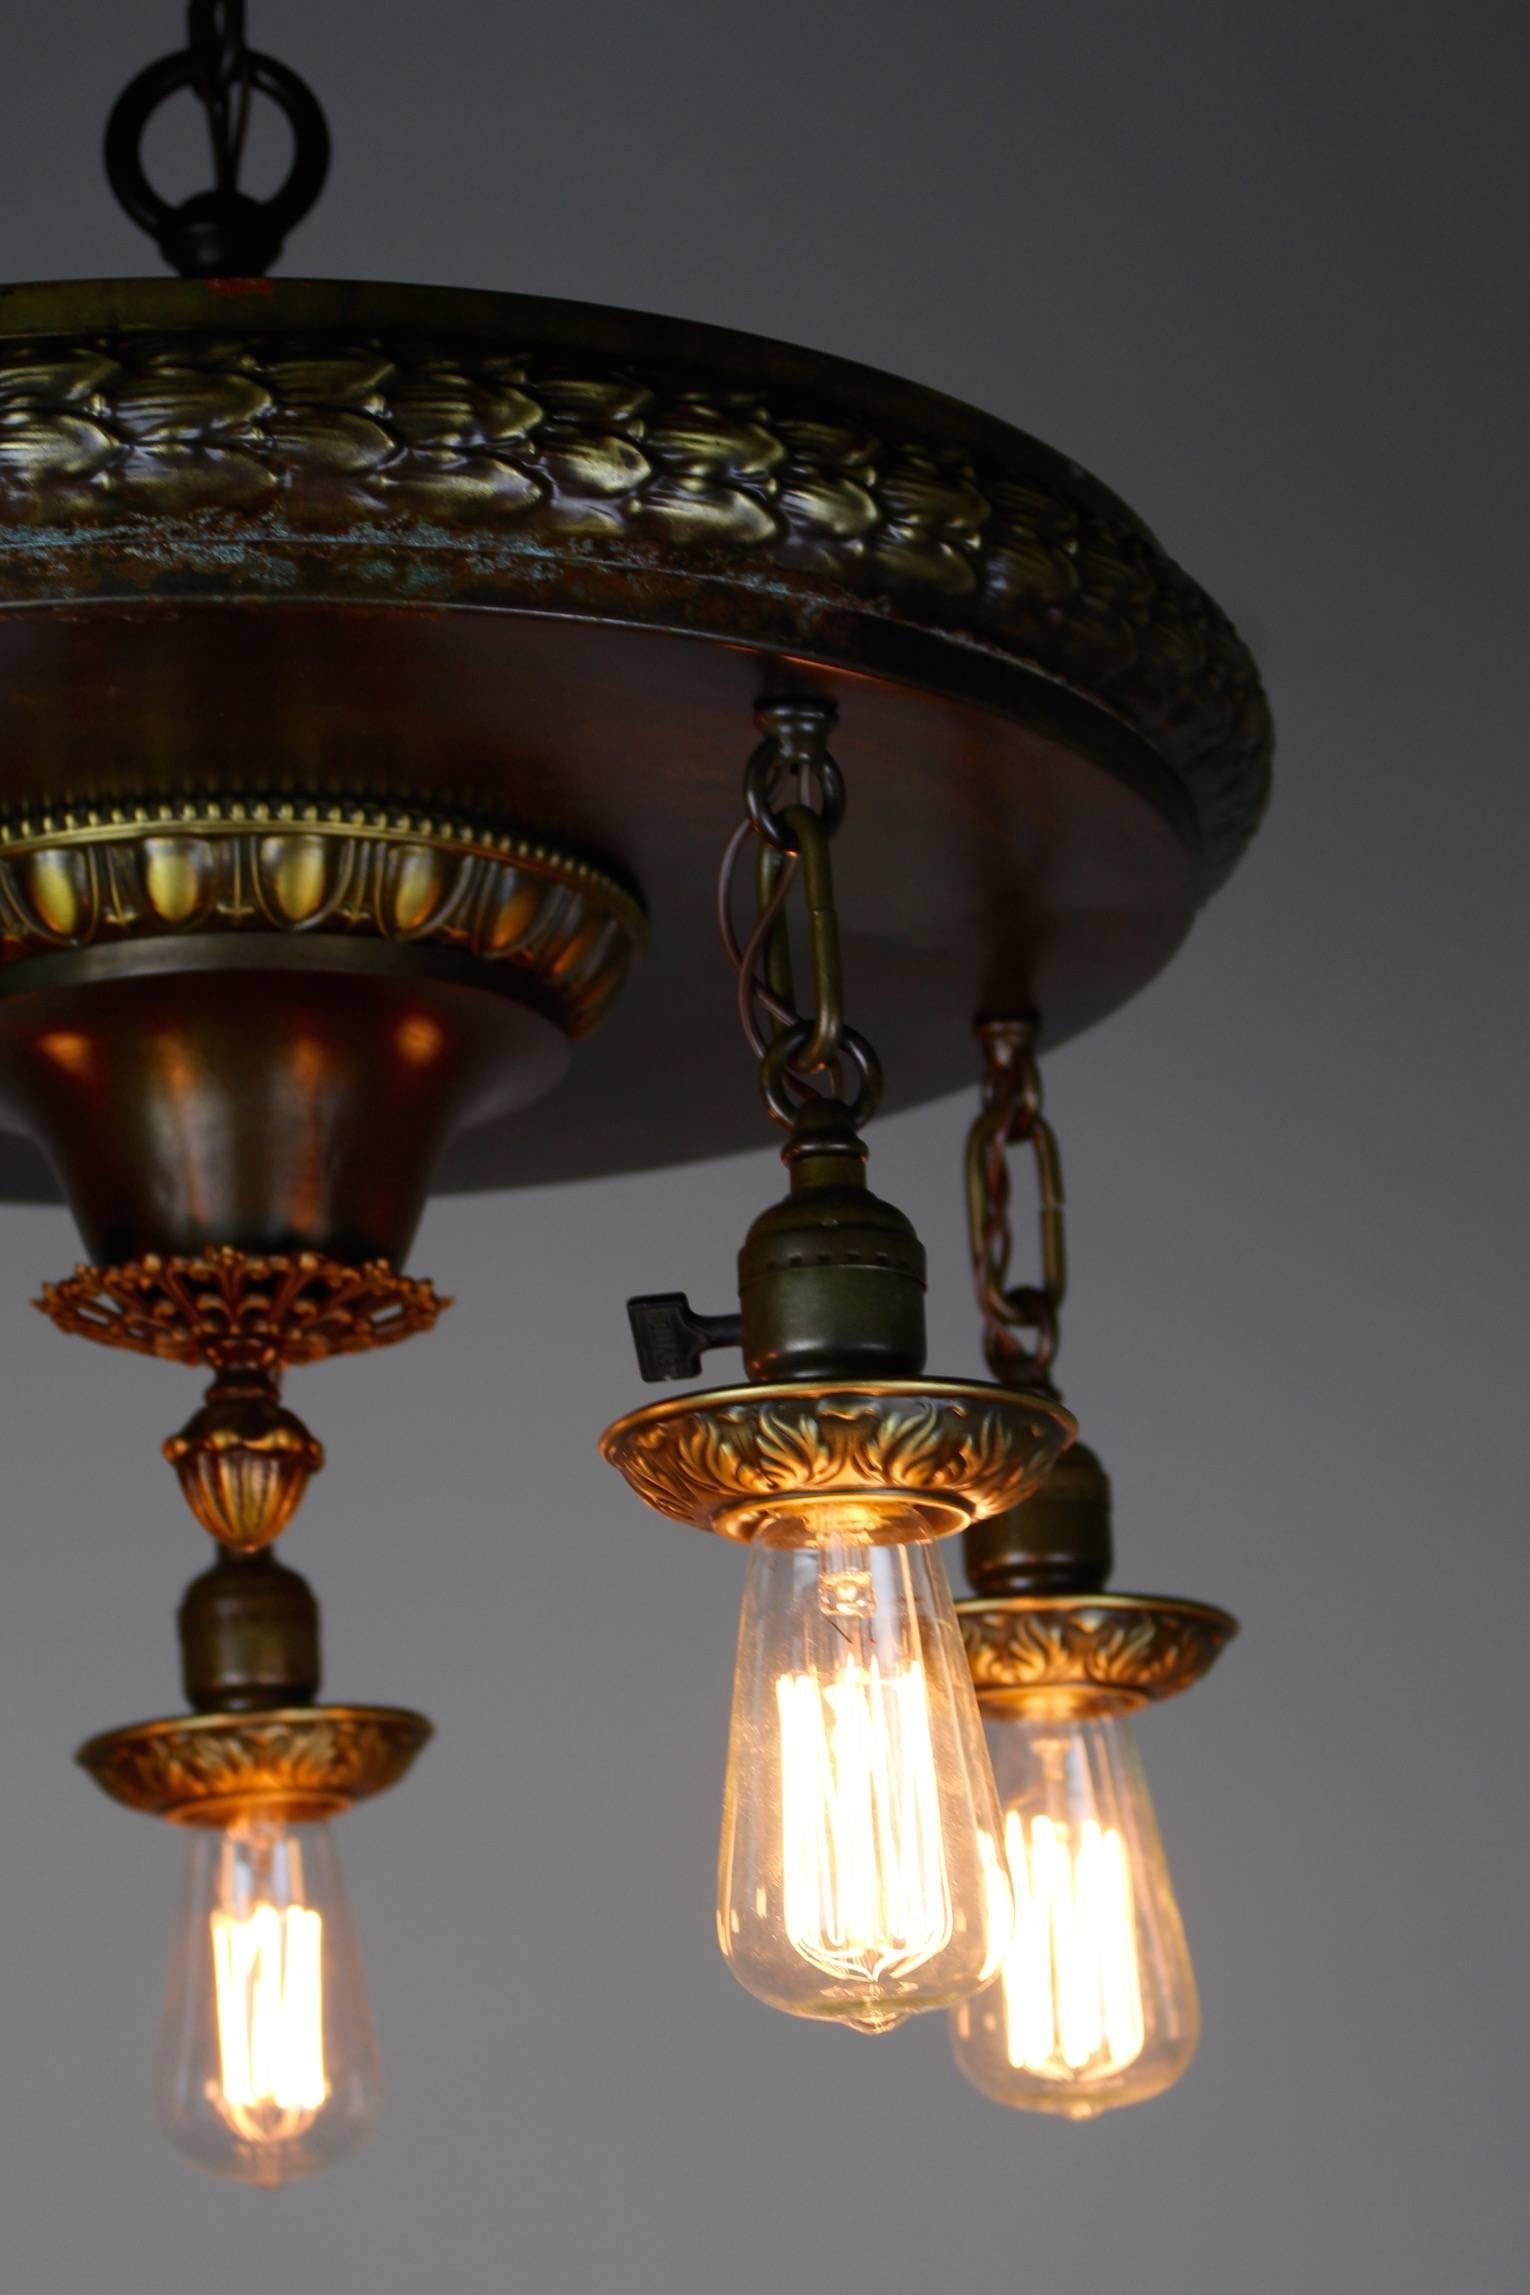 1920s Five-Light Neoclassical Revival Dining Room Fixture In Excellent Condition For Sale In Vancouver, BC